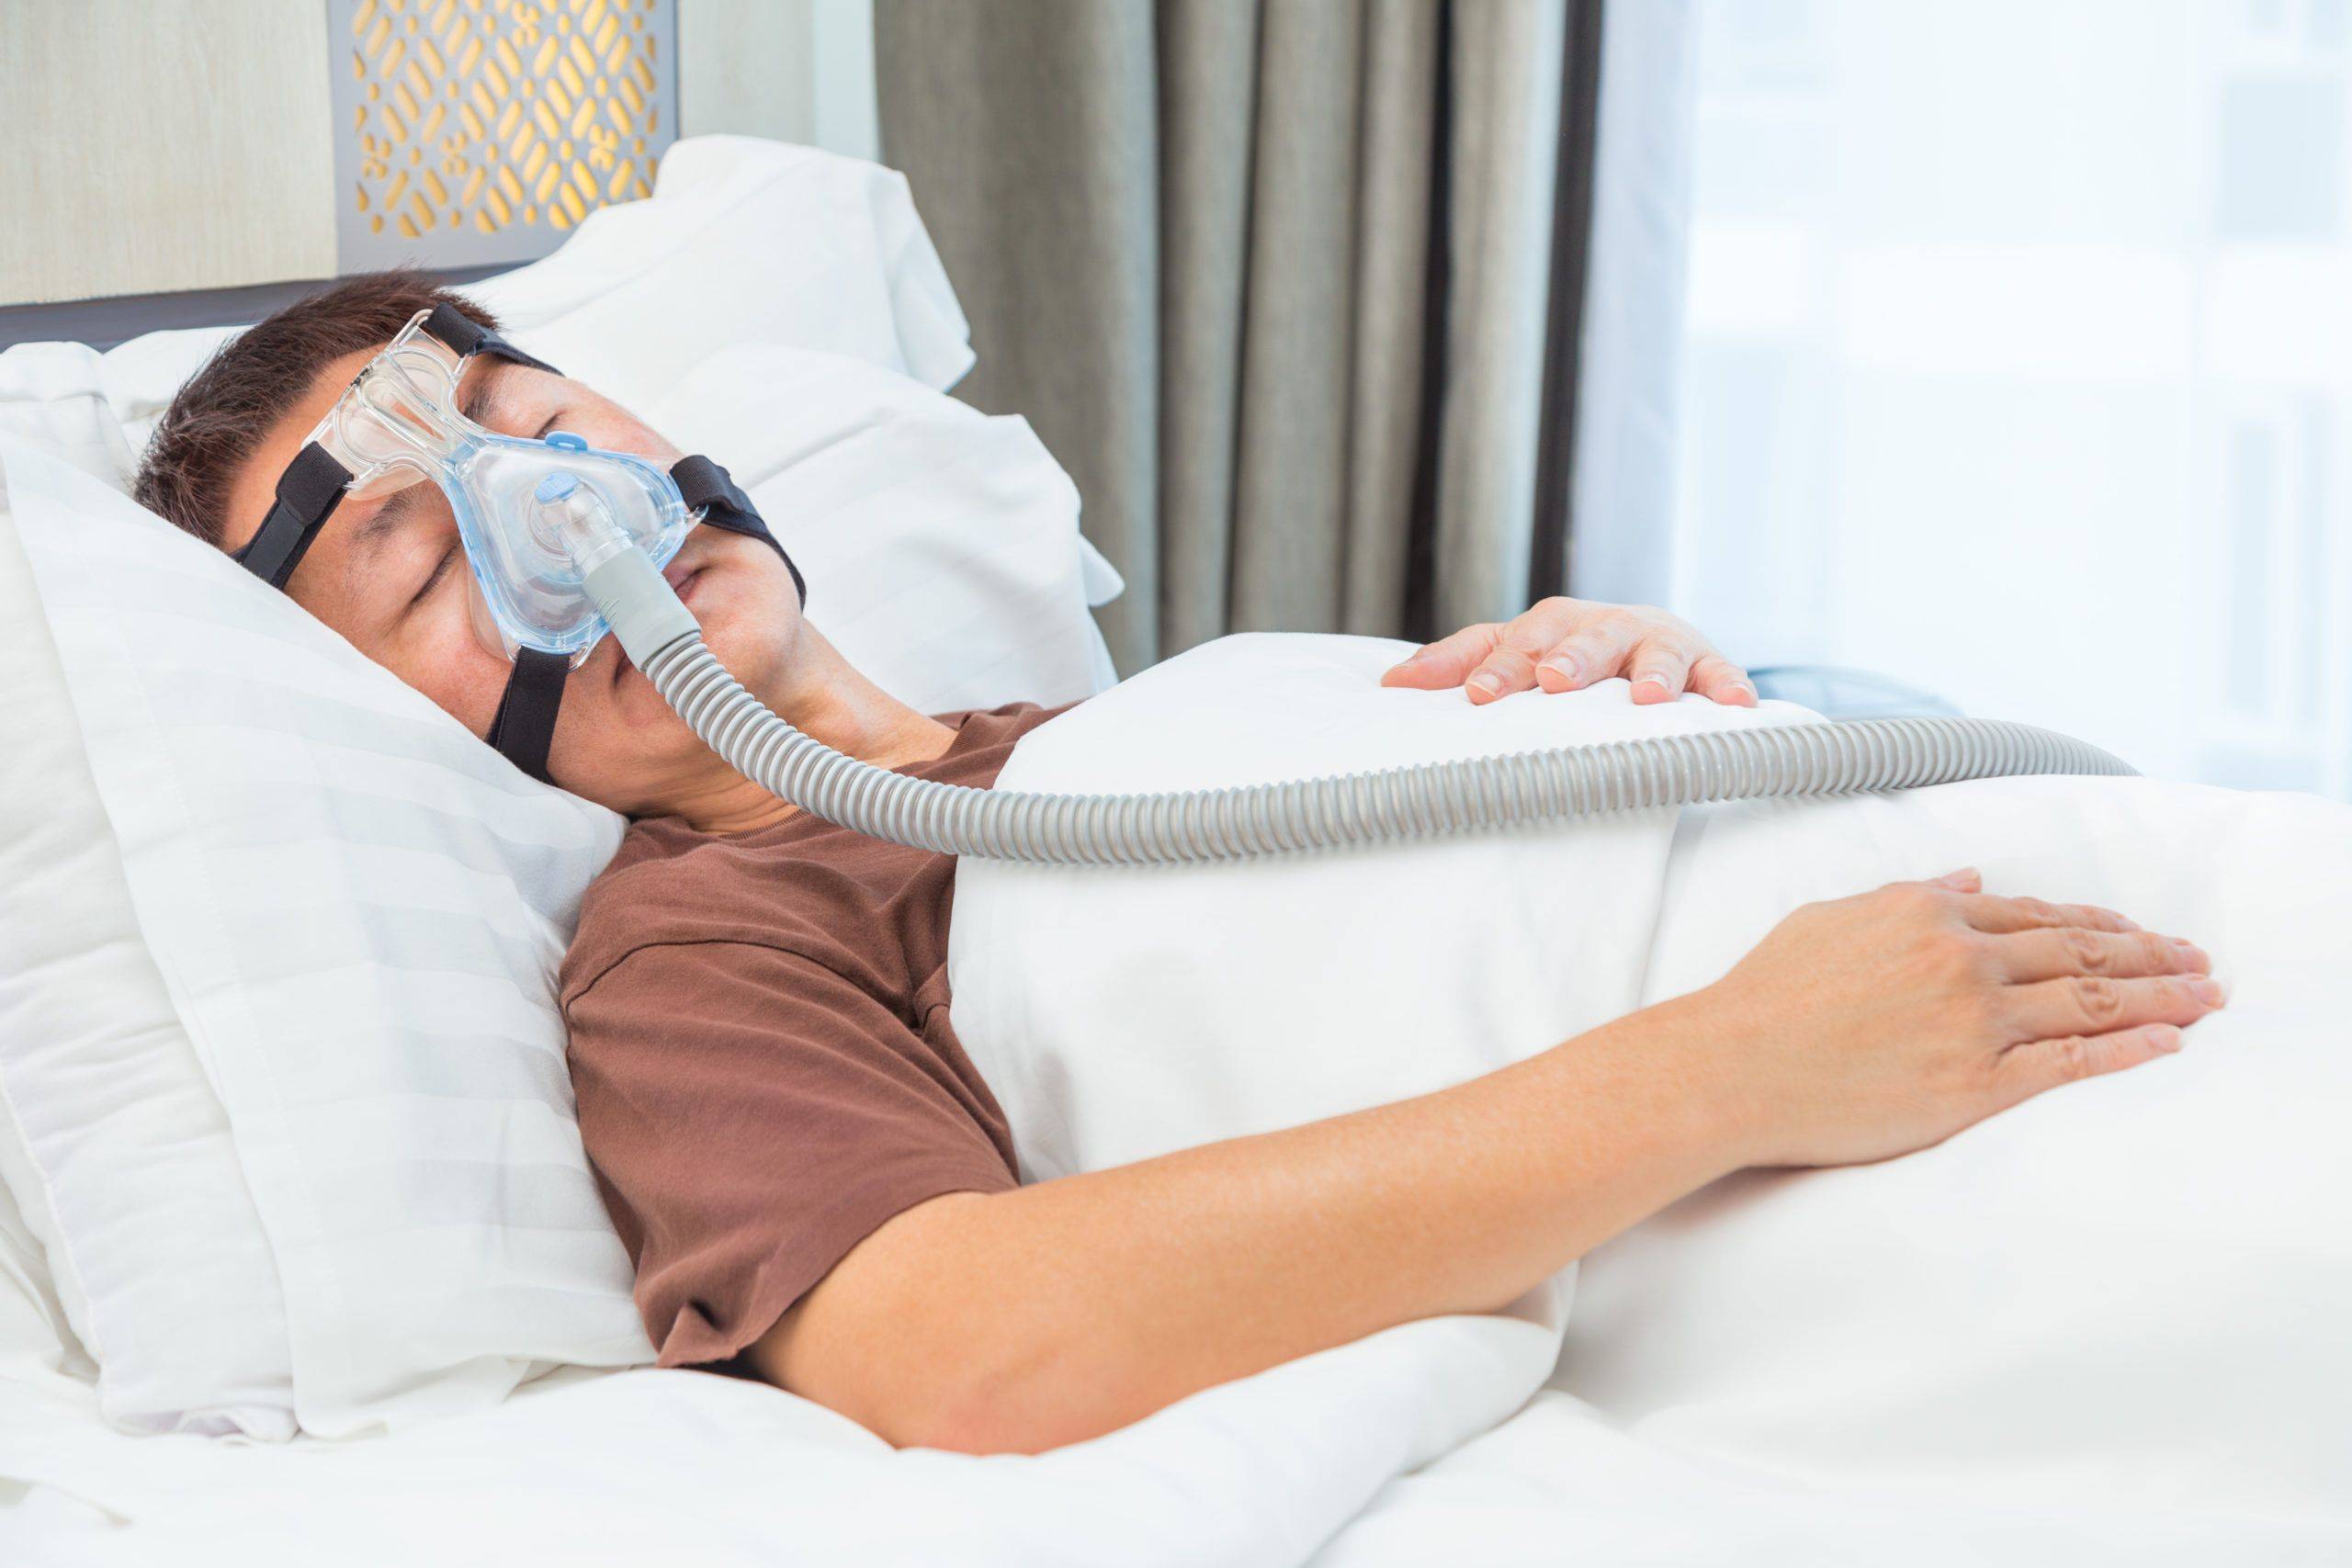 middle age asian man sleeping in his bed wearing CPAP mask connecting to air hose, device for people with sleep apnea